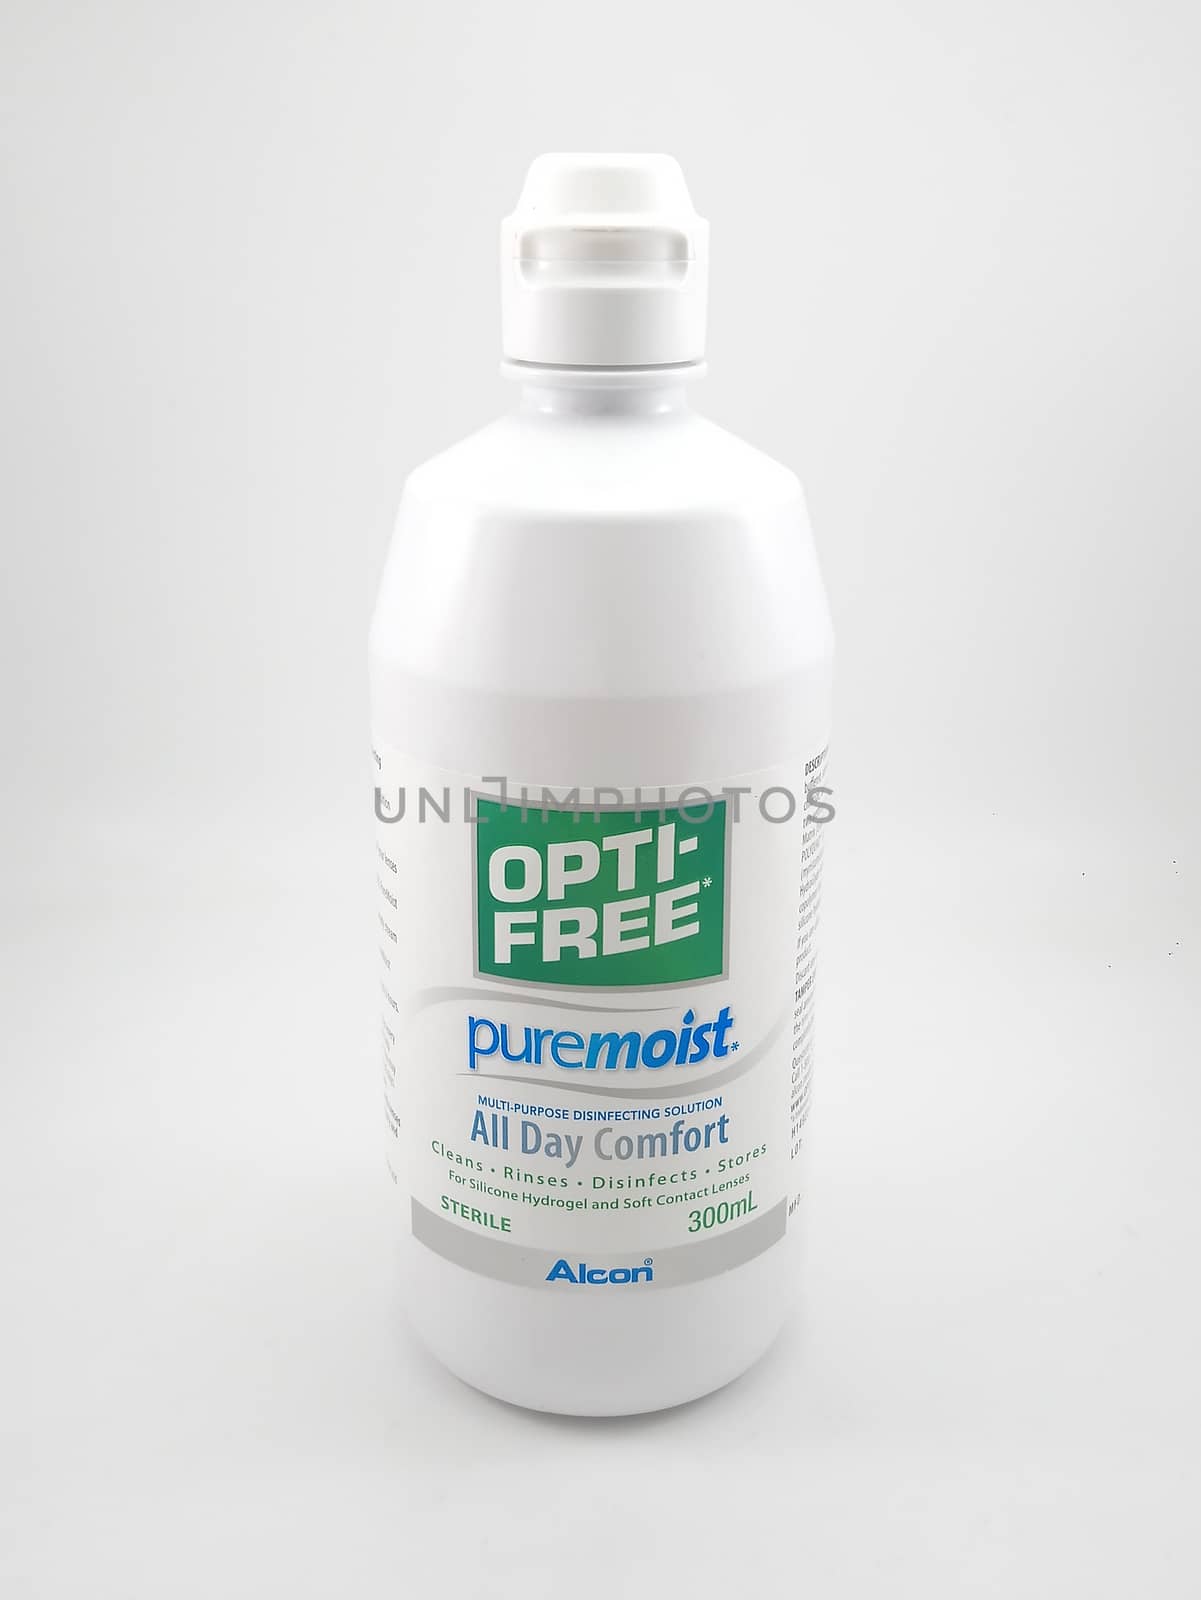 MANILA, PH - SEPT 24 - Optifree pure moist multi purpose disinfecting solution for contact lens on September 24, 2020 in Manila, Philippines.